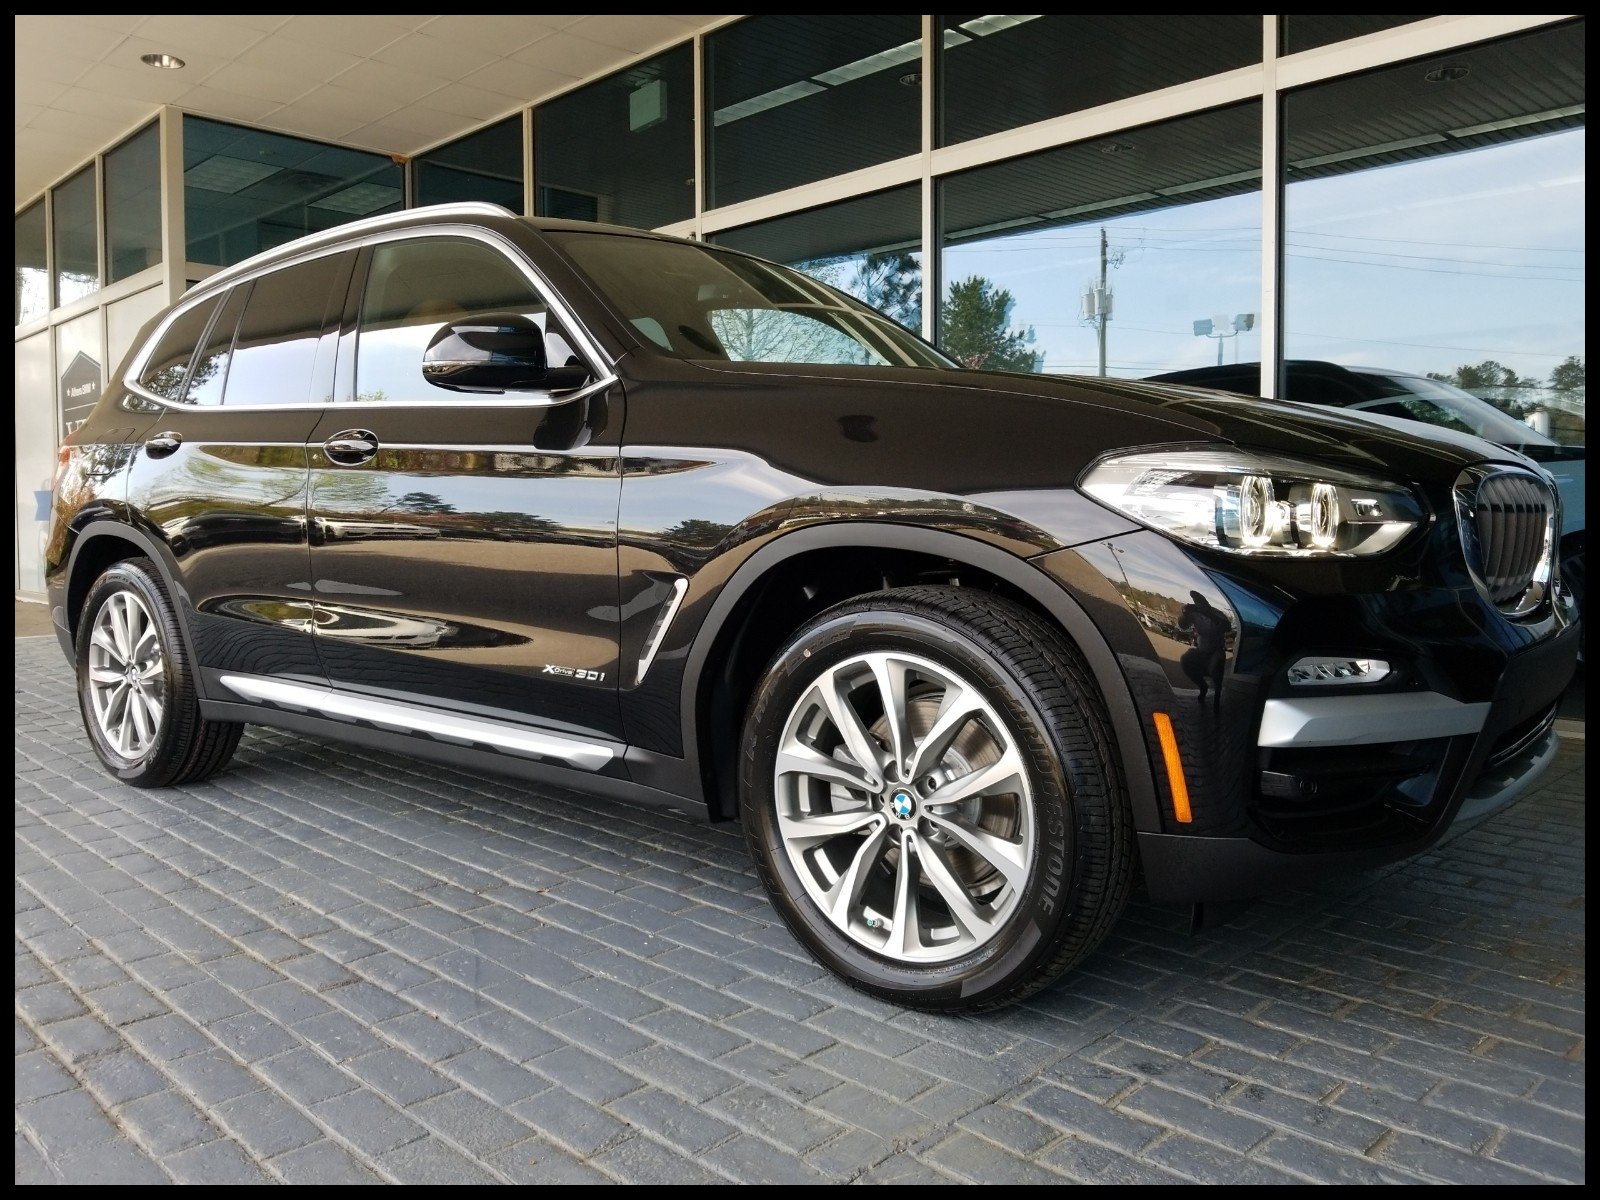 Bmw Lease Deals Ma 2018 Bmw X3 for Sale In athens Ga athens Bmw